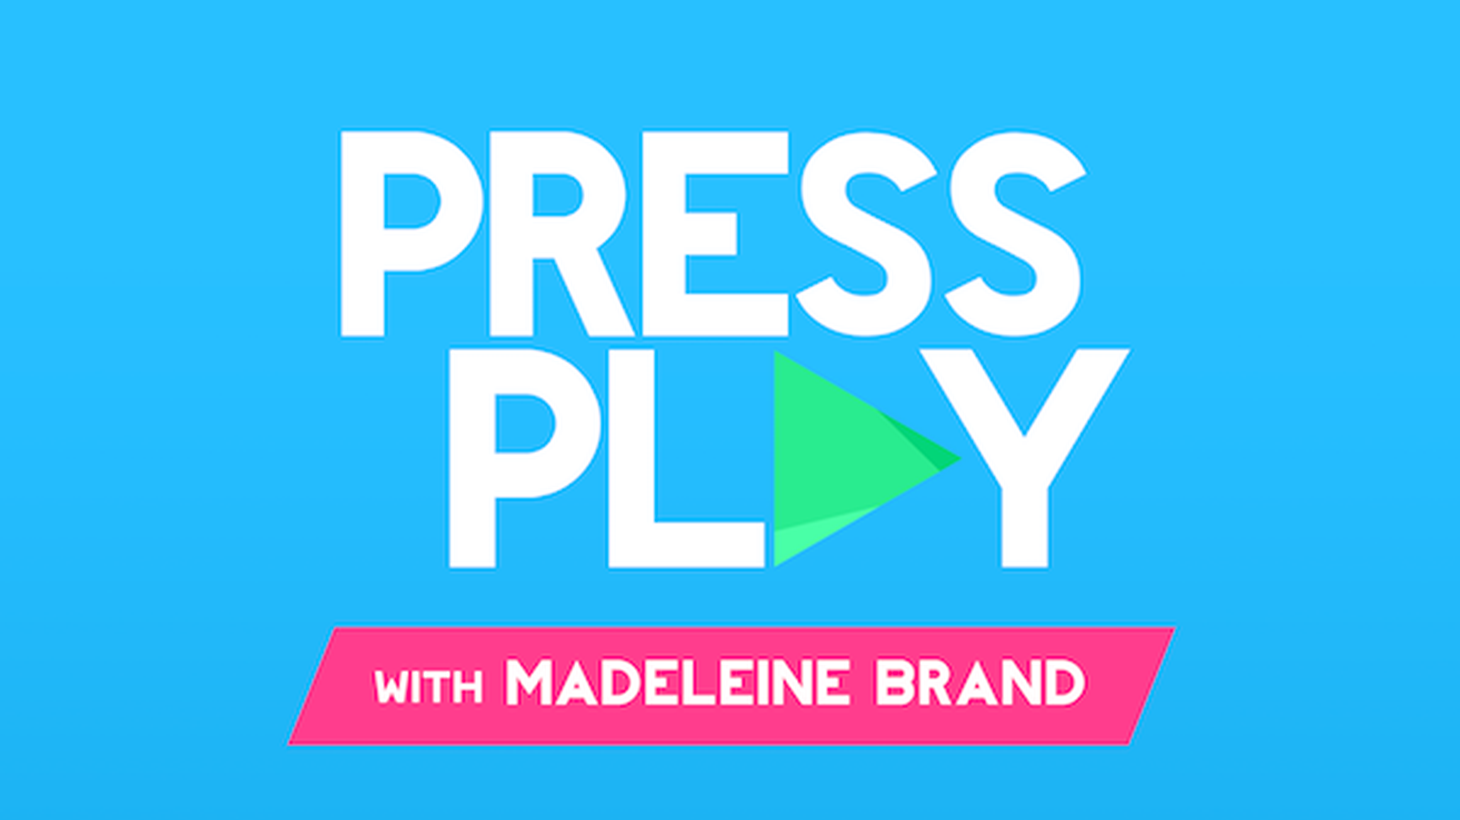 Today on Press Play, we talk to University of California president Janet Napolitano about a new bill that would change the way colleges handle sexual assault. We also meet Jon Gnarr, an Icelandic comedian who ran for mayor of Reykjavic as a joke -- and won.